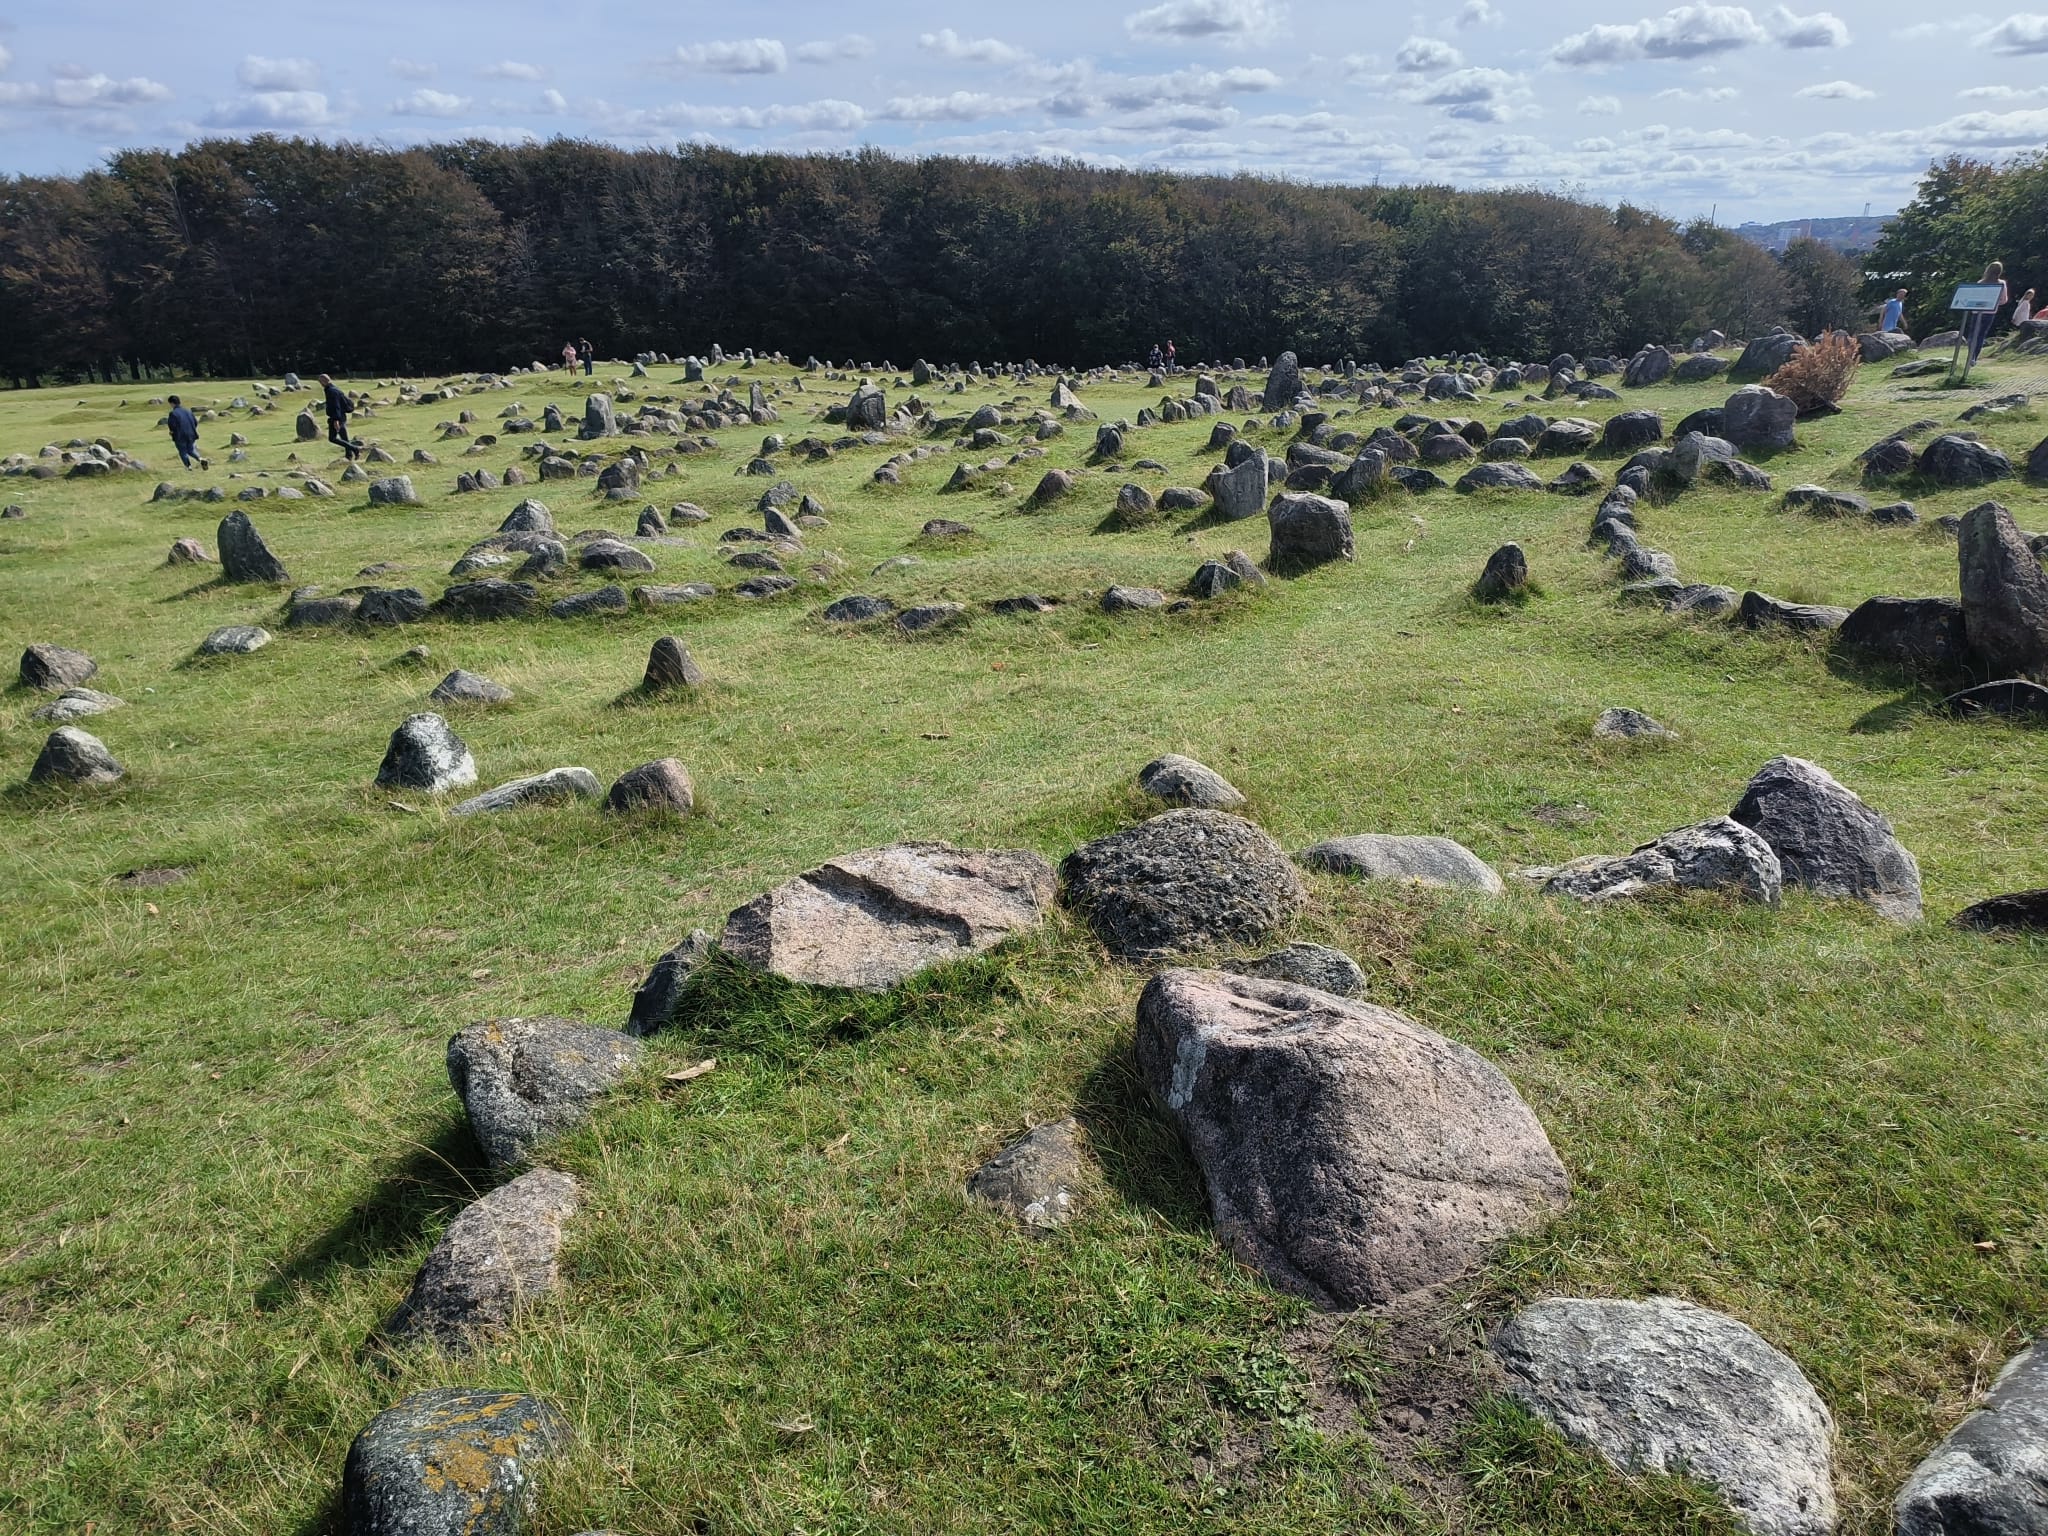 Some parts of Lindholm Høje date back to the 5th century